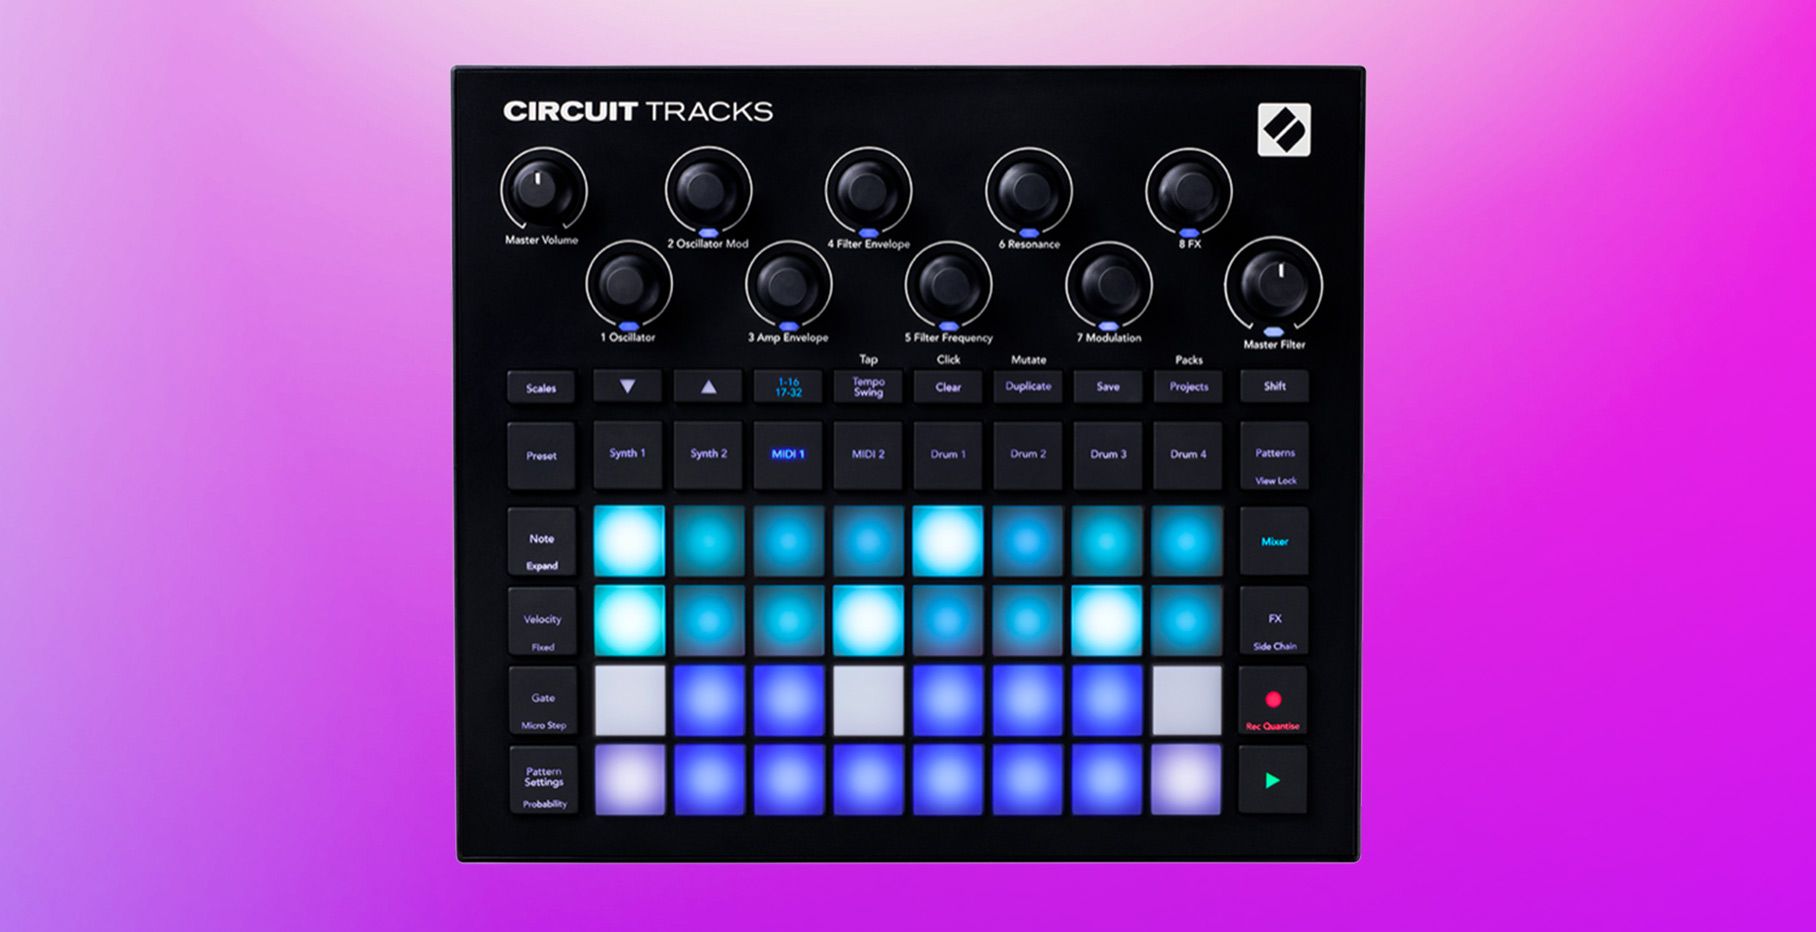 Review: Novation’s Circuit Tracks is an even better Circuit groovebox